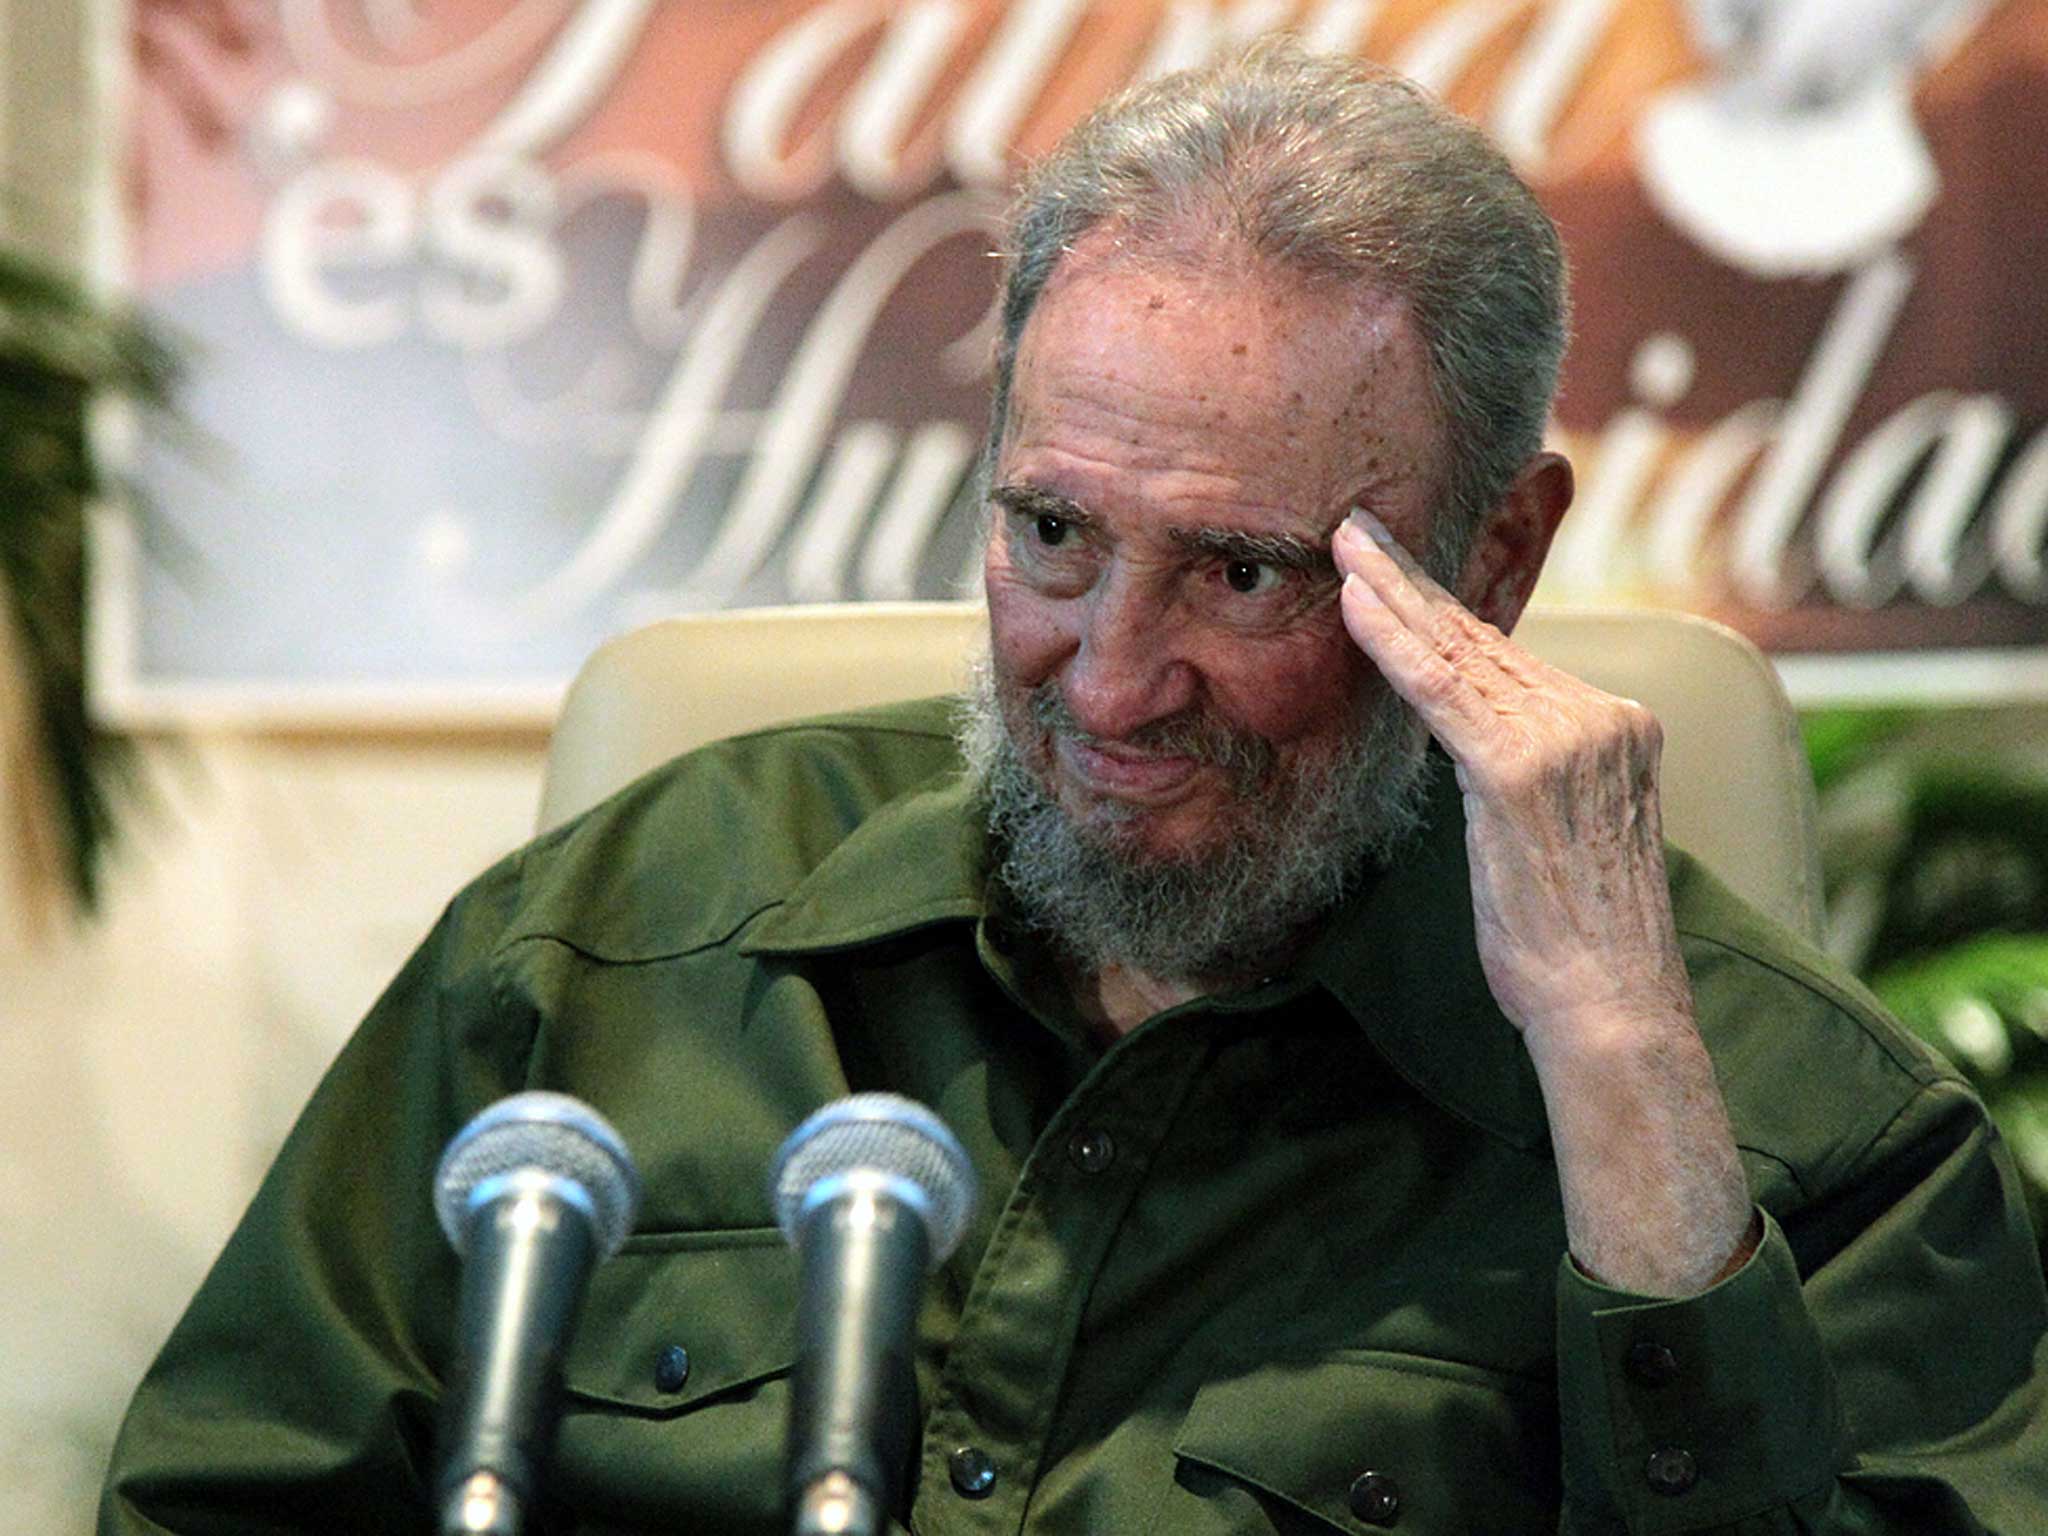 &#13;
Fidel Castro during a ceremony to pay homage to national hero Jose Marti in 2010 (Getty)&#13;